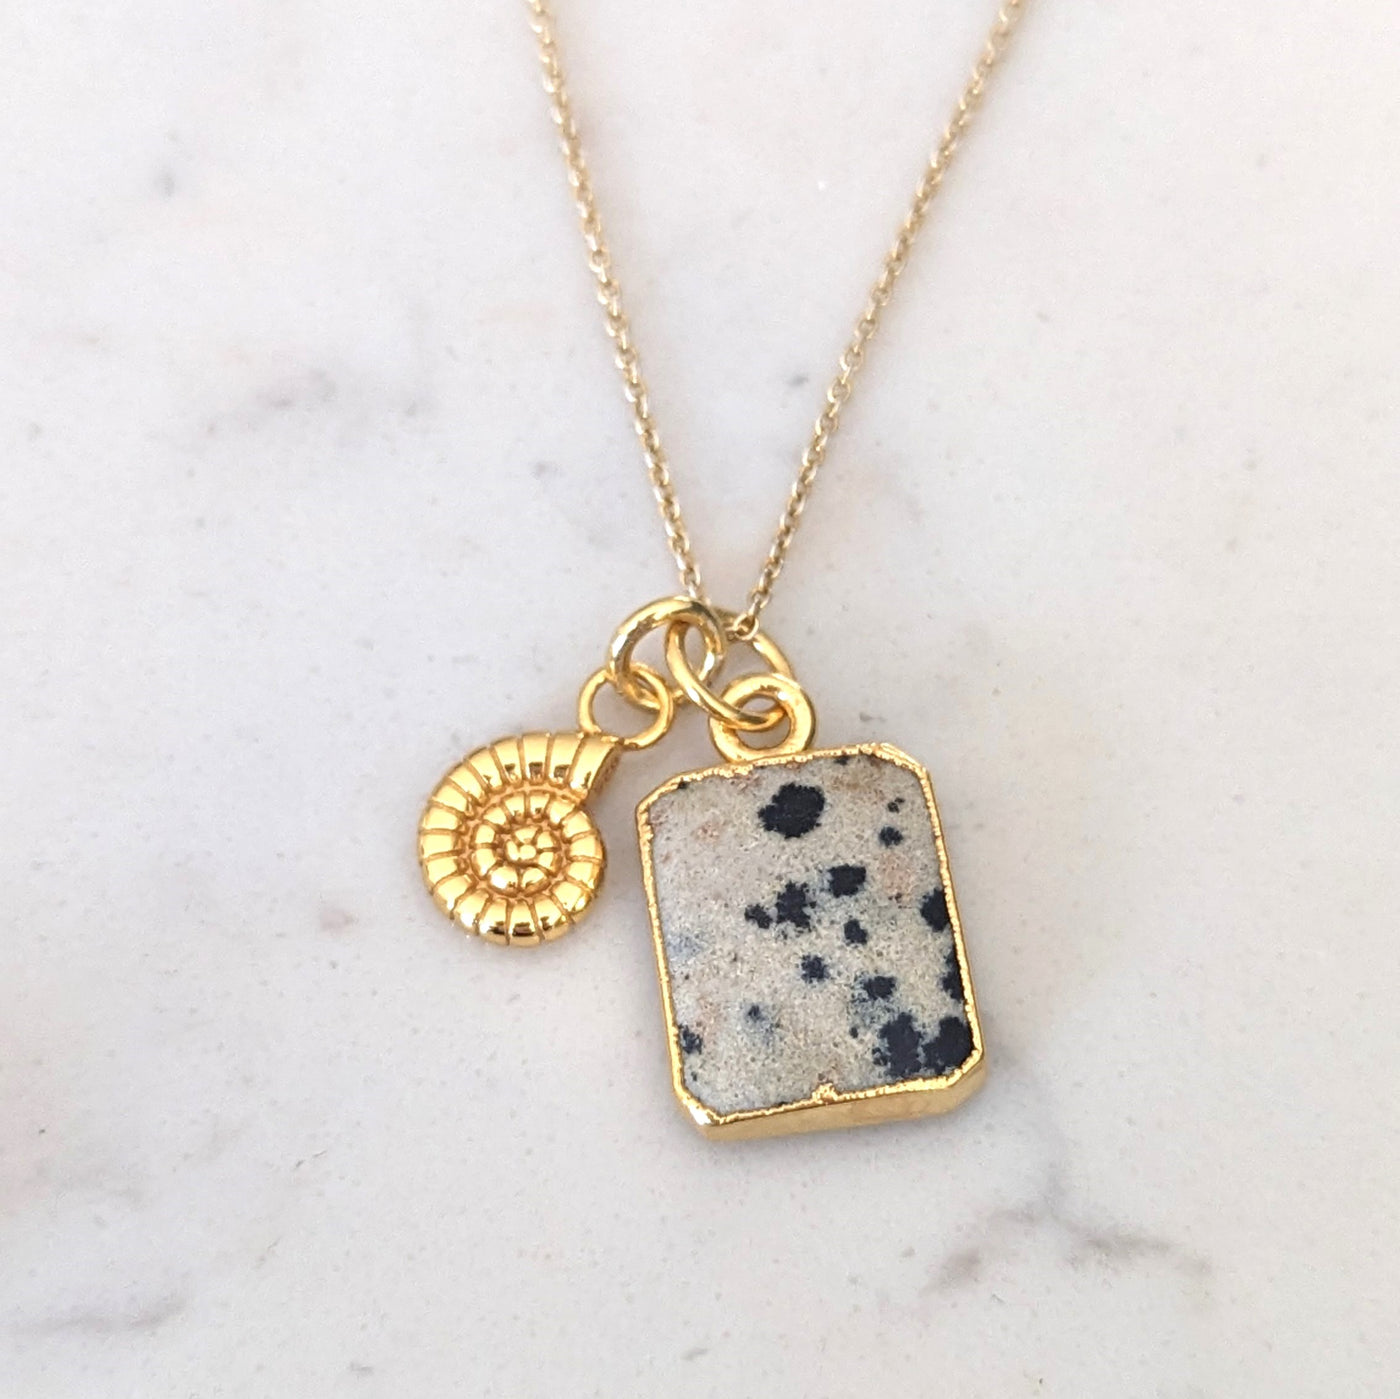 Dalmatian Jasper and charm gold plated necklace